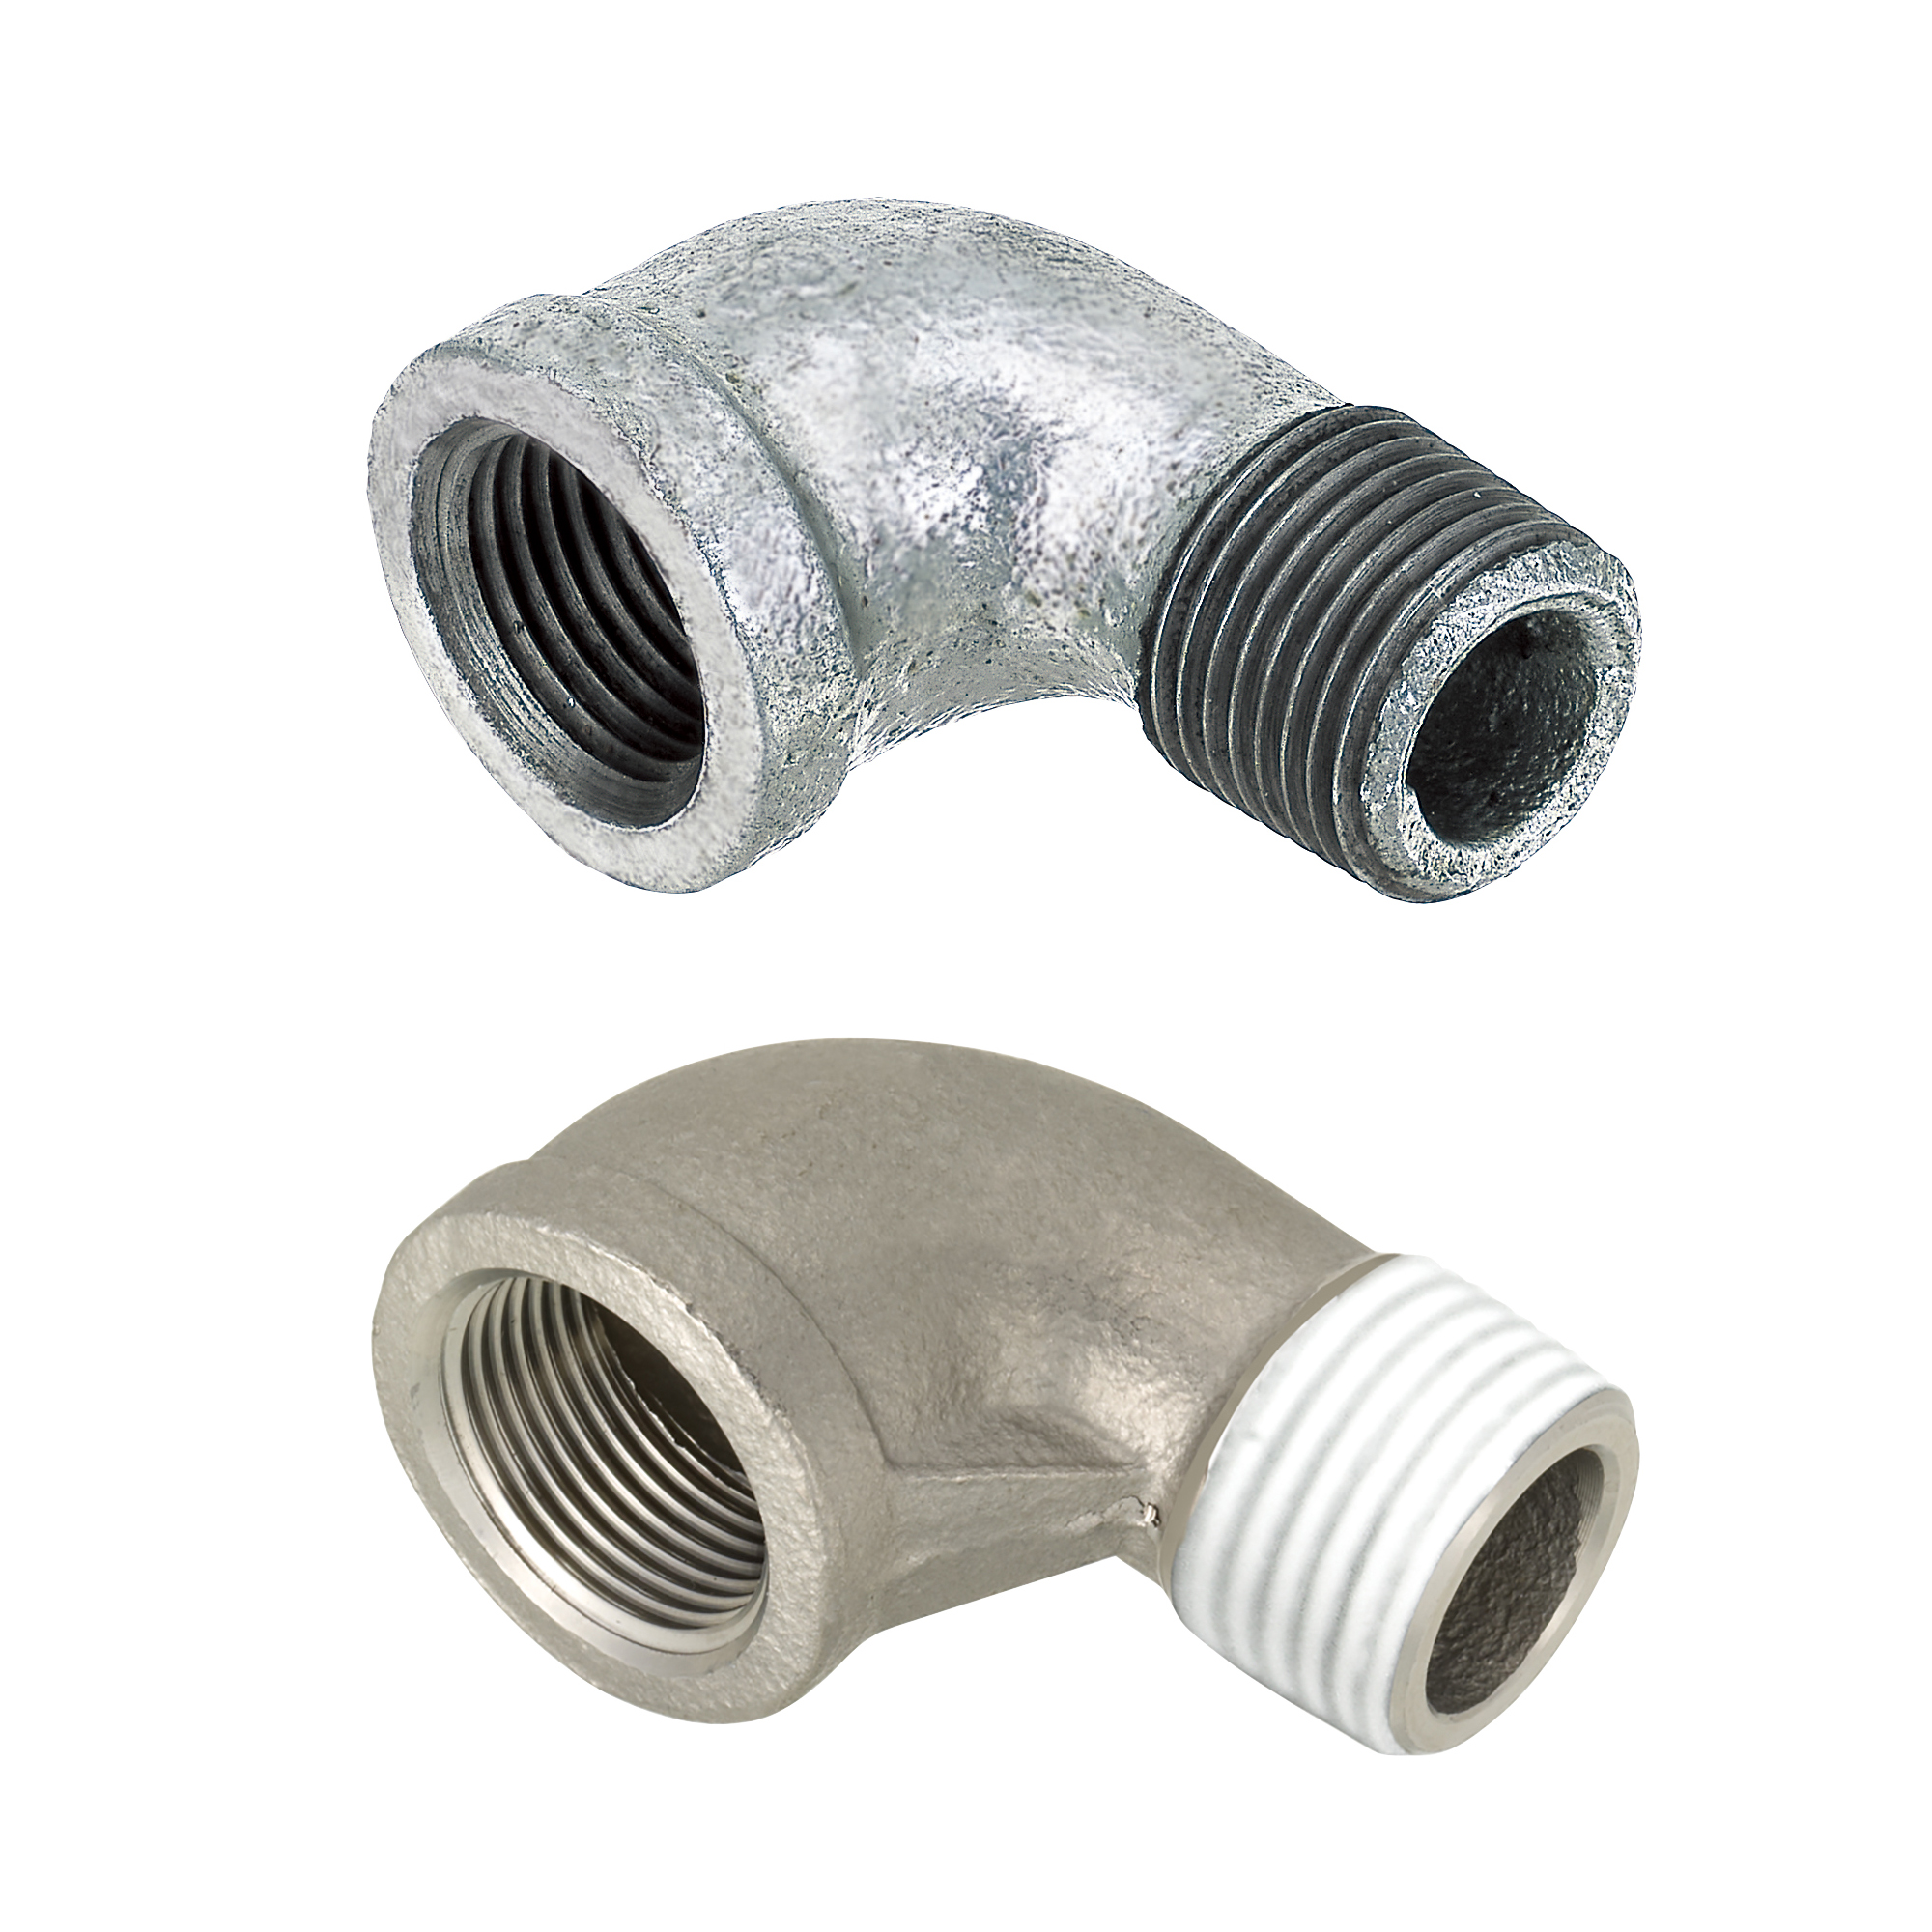 Low Pressure Fittings/90 Deg. Elbow/Threaded and Tapped (SUTPEL15A) 